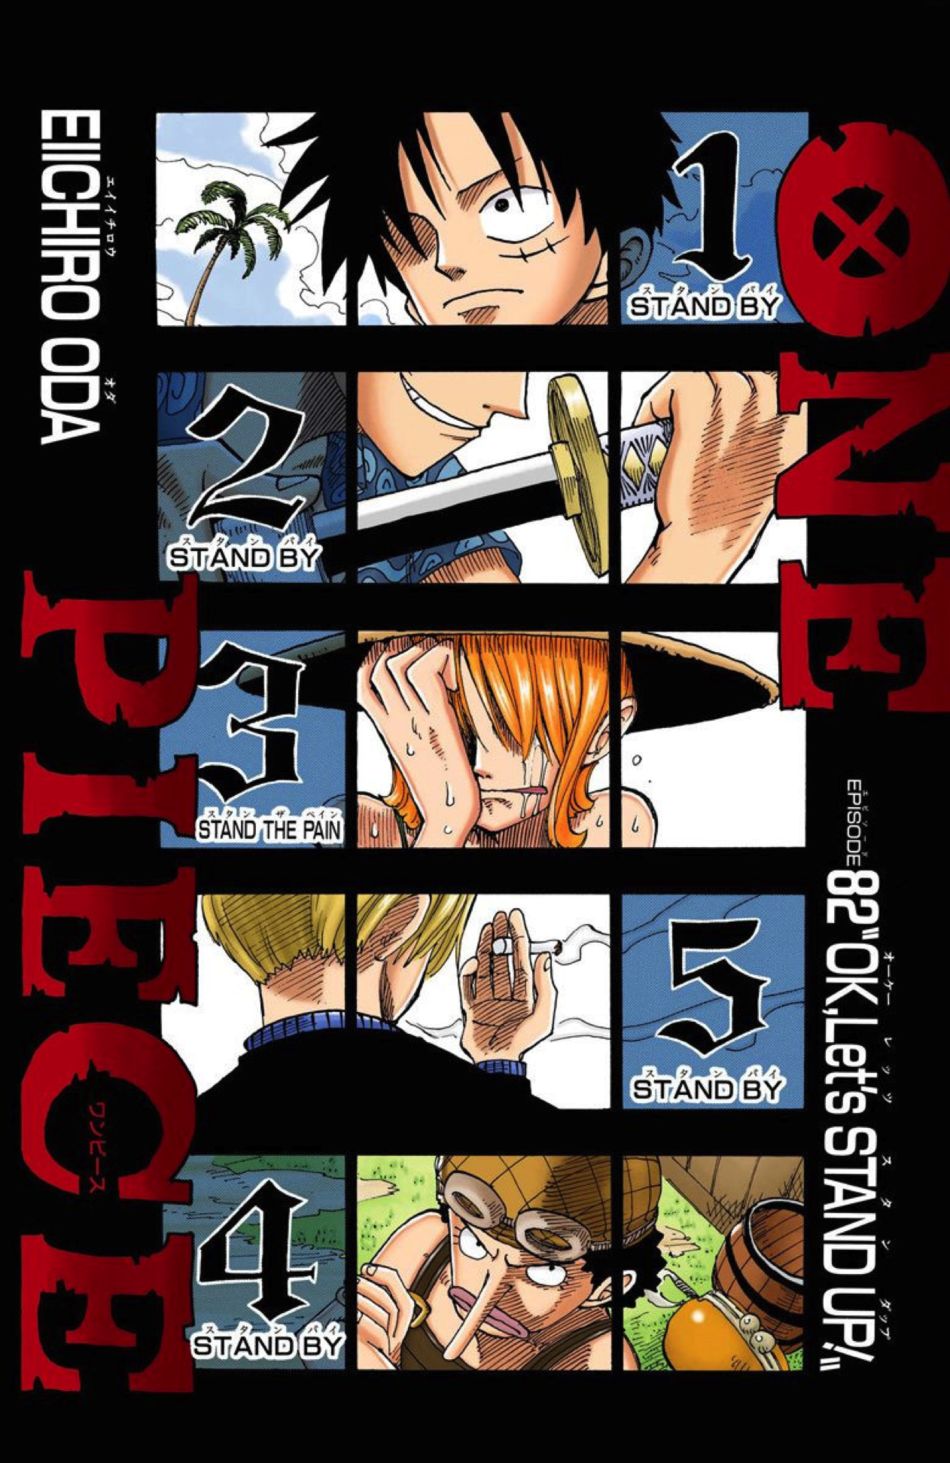 One Piece - Chapter 82 Colored.jpg